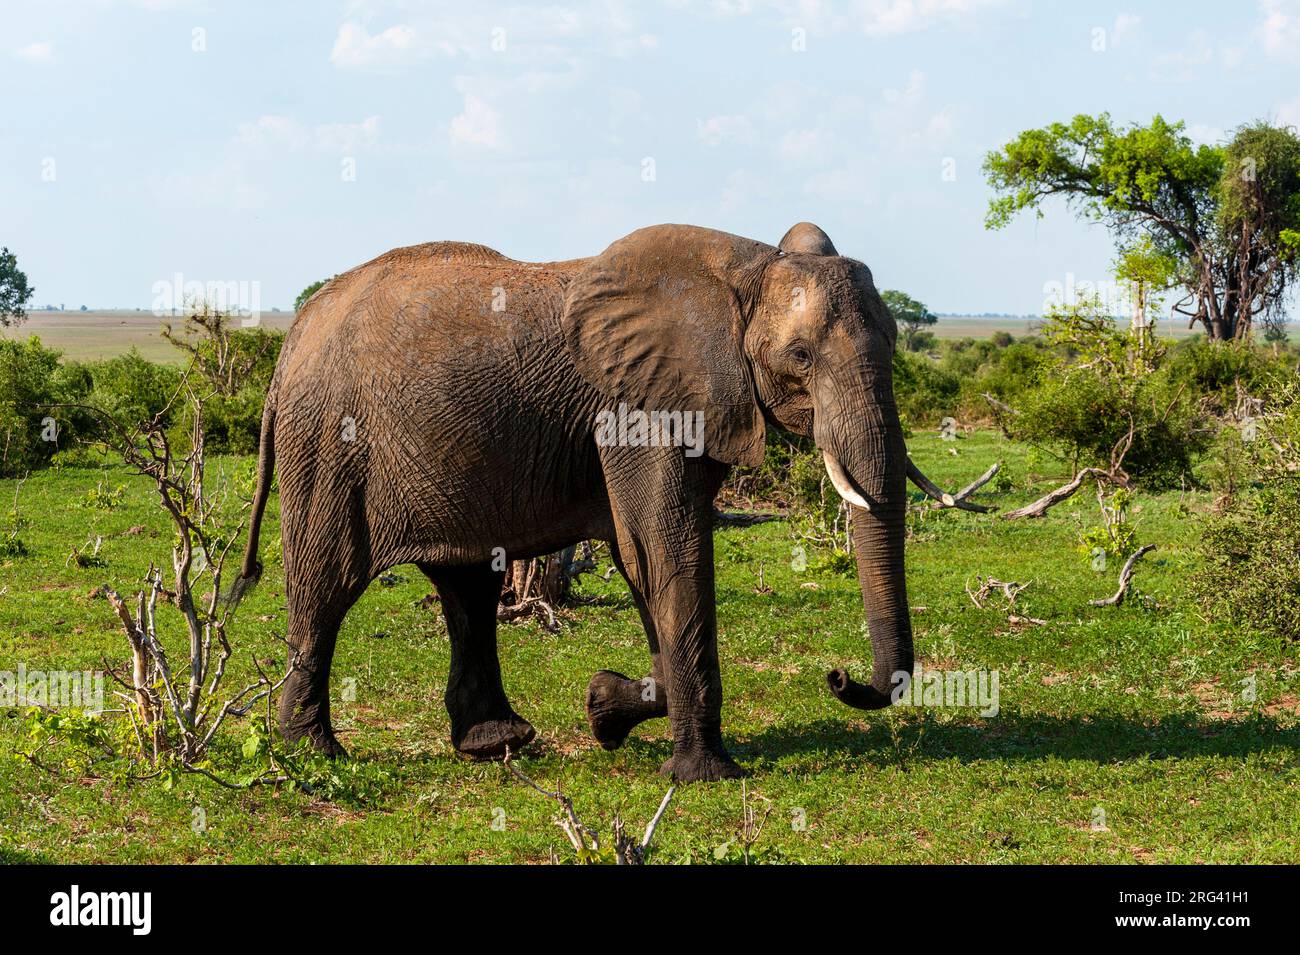 An African elephant, Loxodonta africana, glancing at the photographer as it walks by. Chobe National Park, Botswana. Stock Photo